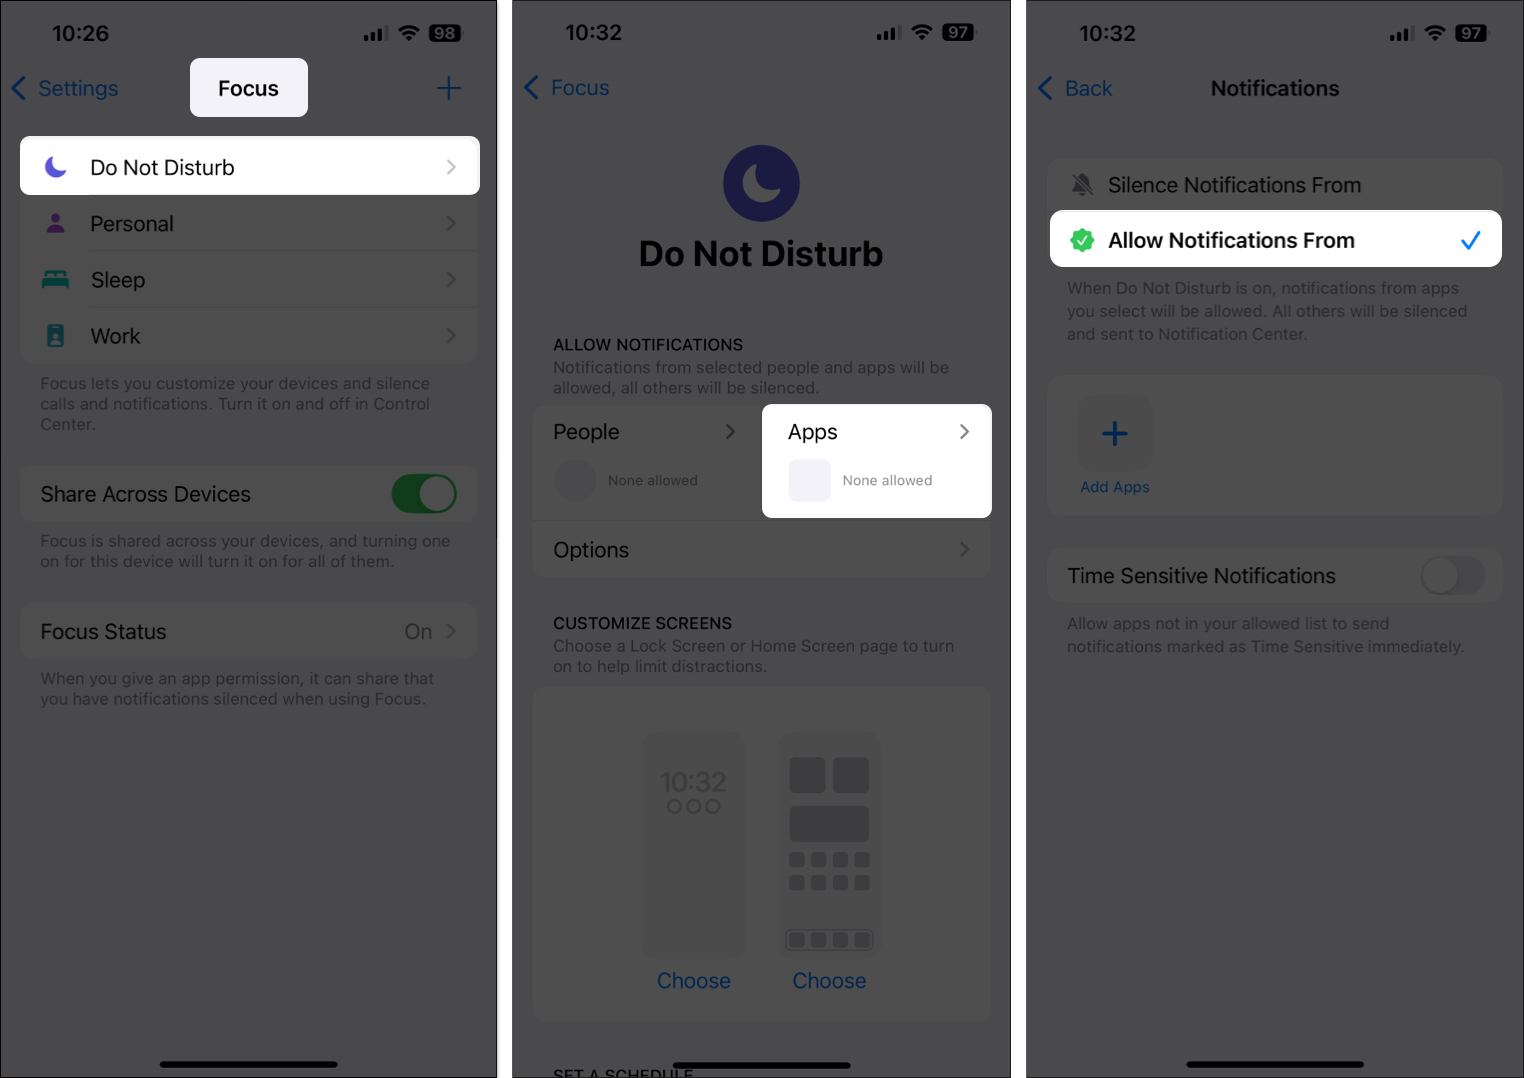 Allow Notifications From option in Do Not Disturb Focus setting on iPhone.